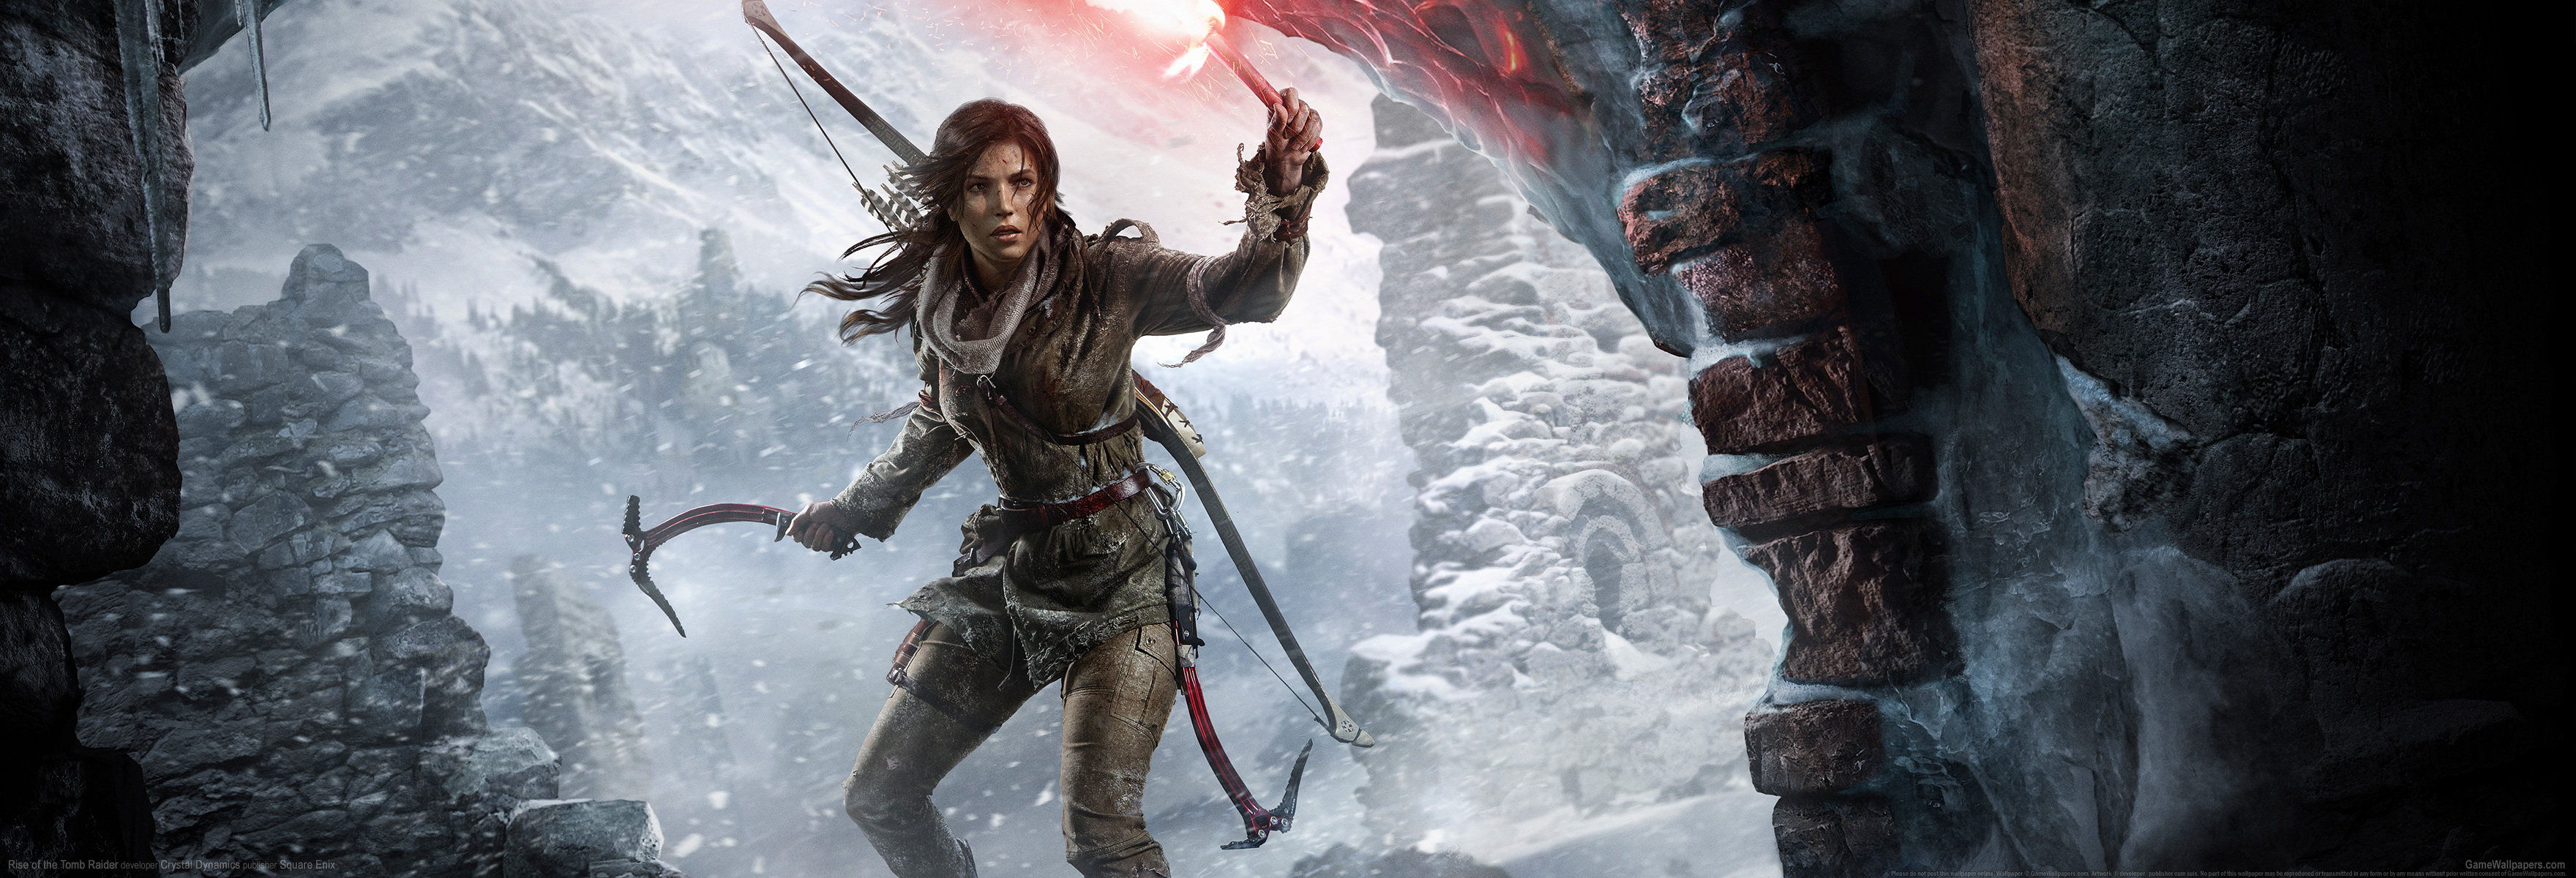 Rise of the Tomb Raider wallpaper 11 3520x1200